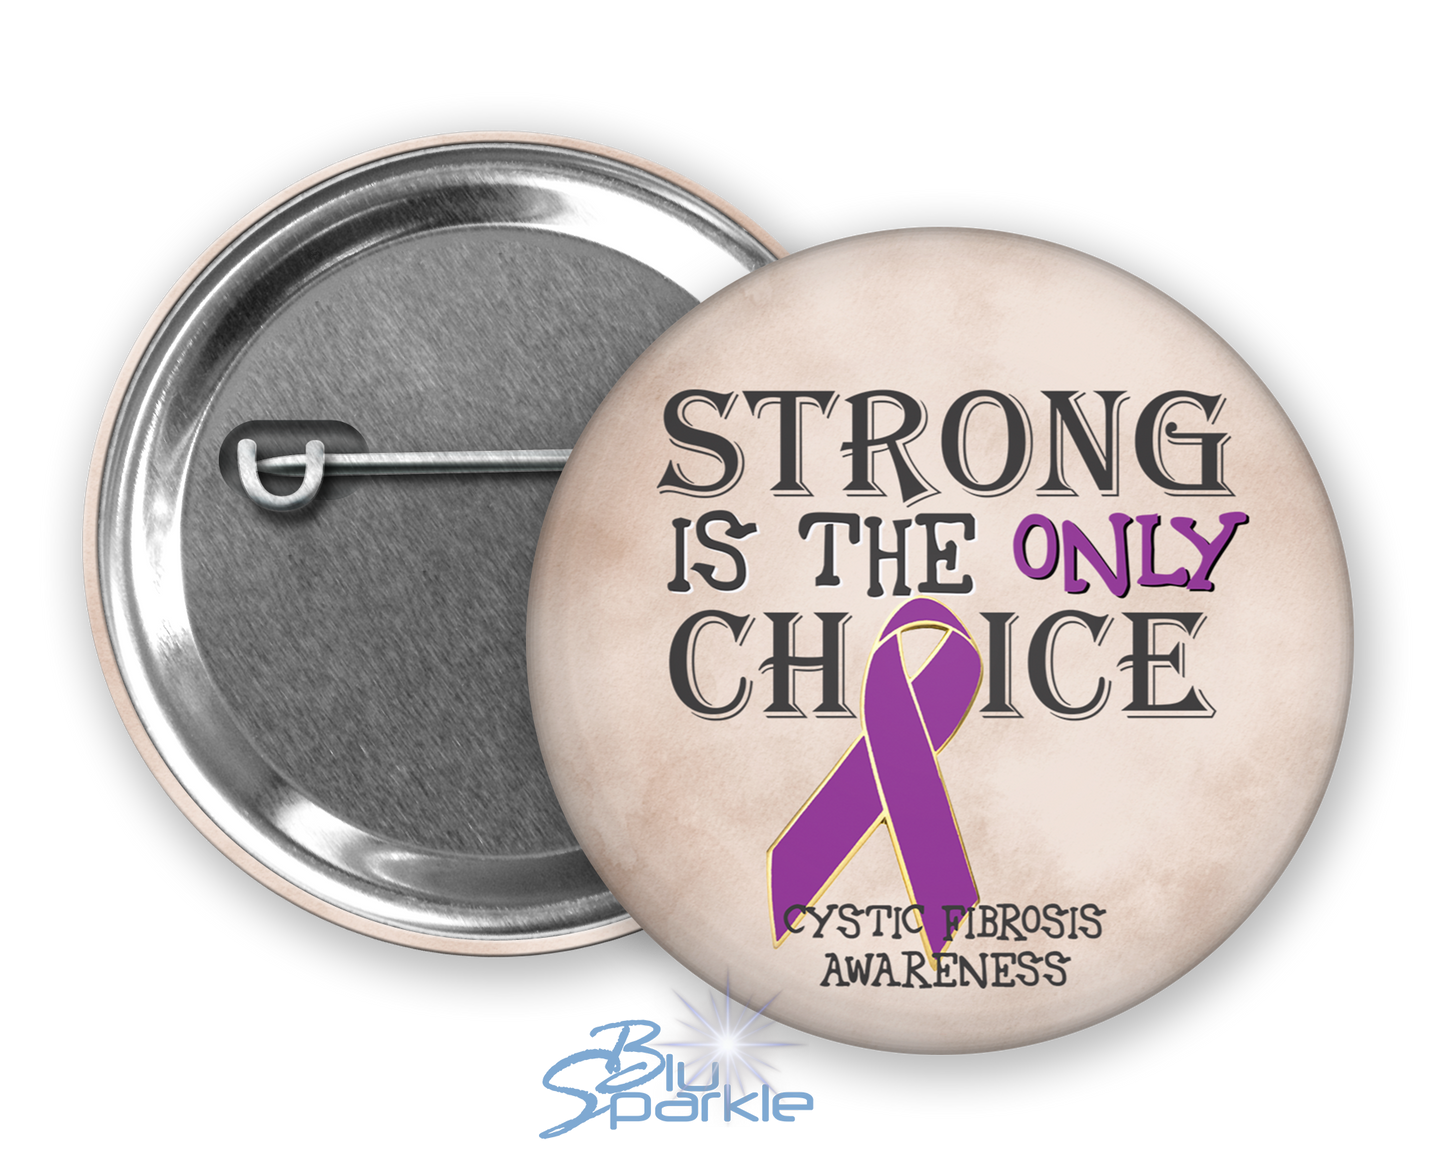 Strong is the Only Choice -Cystic Fibrosis Awareness Pinback Button |x|